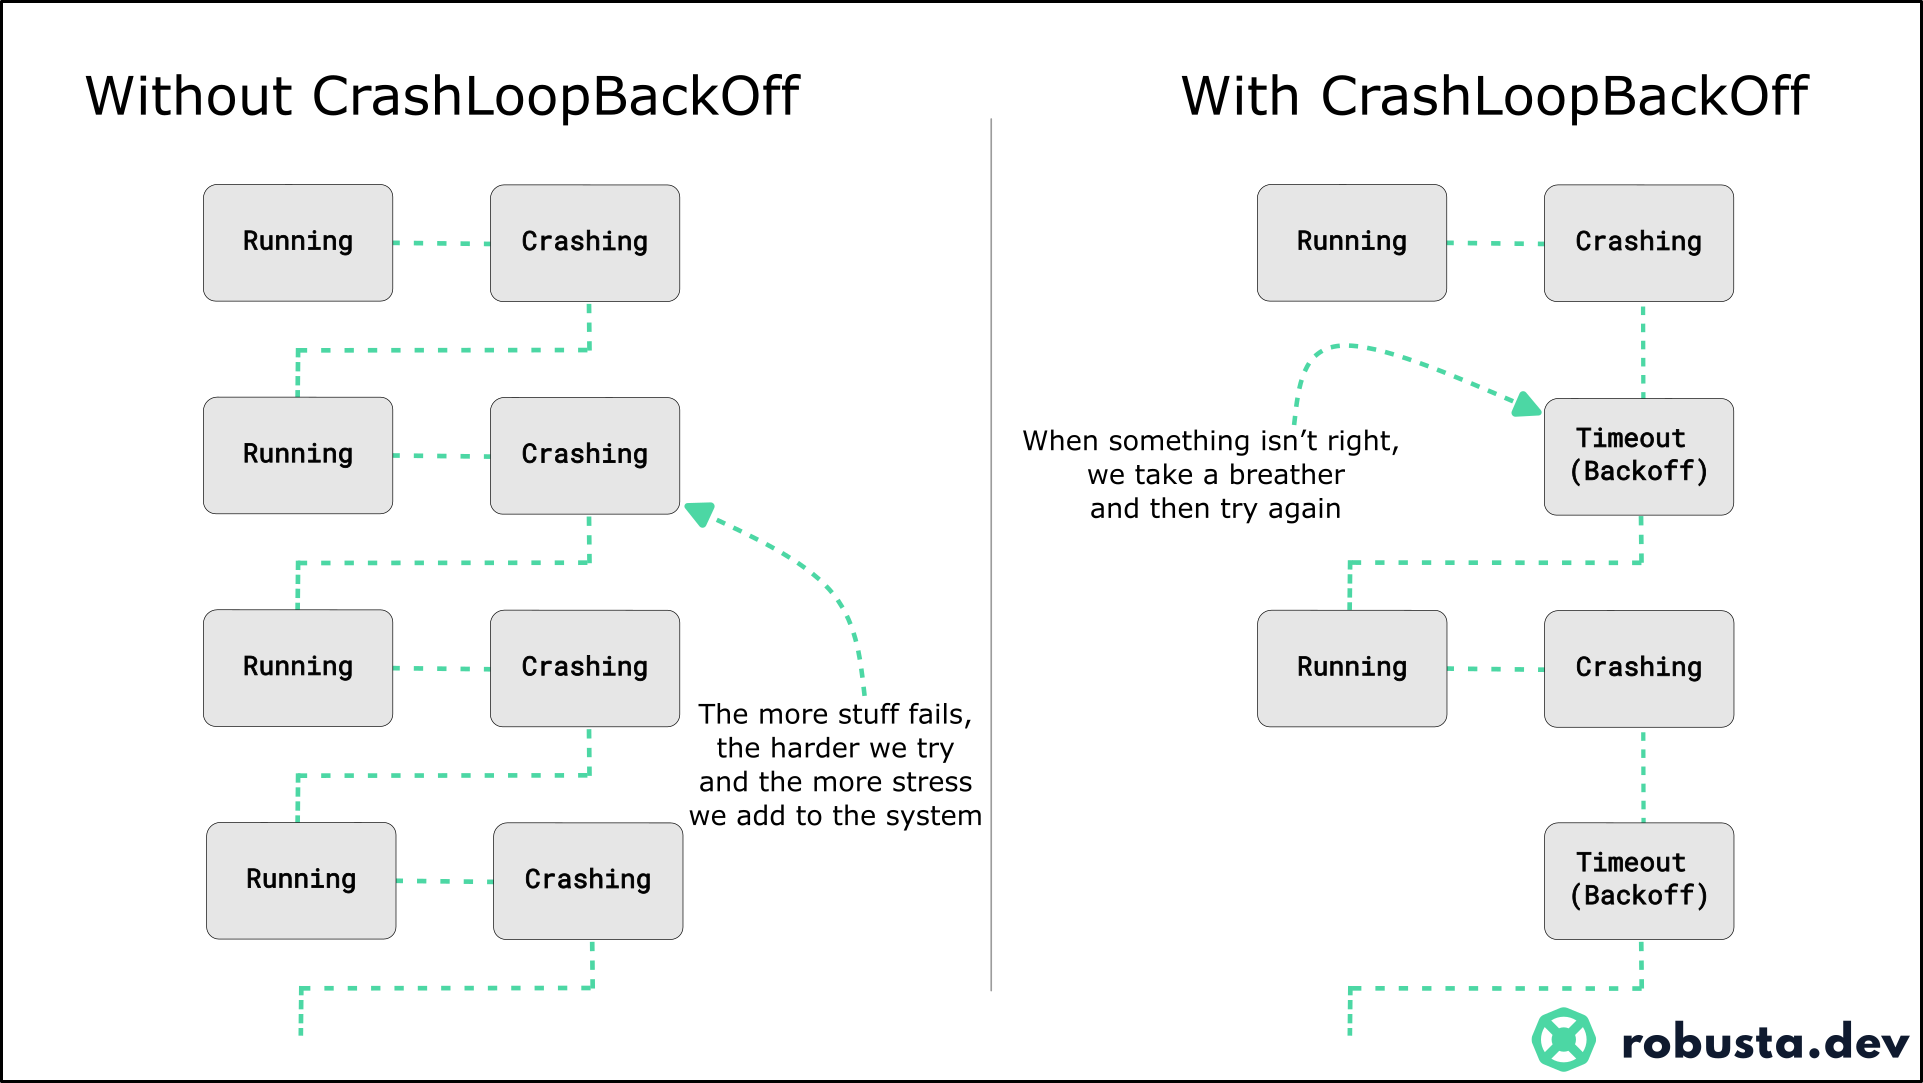 Comparision of kubernetes with and without crashloopbackoff